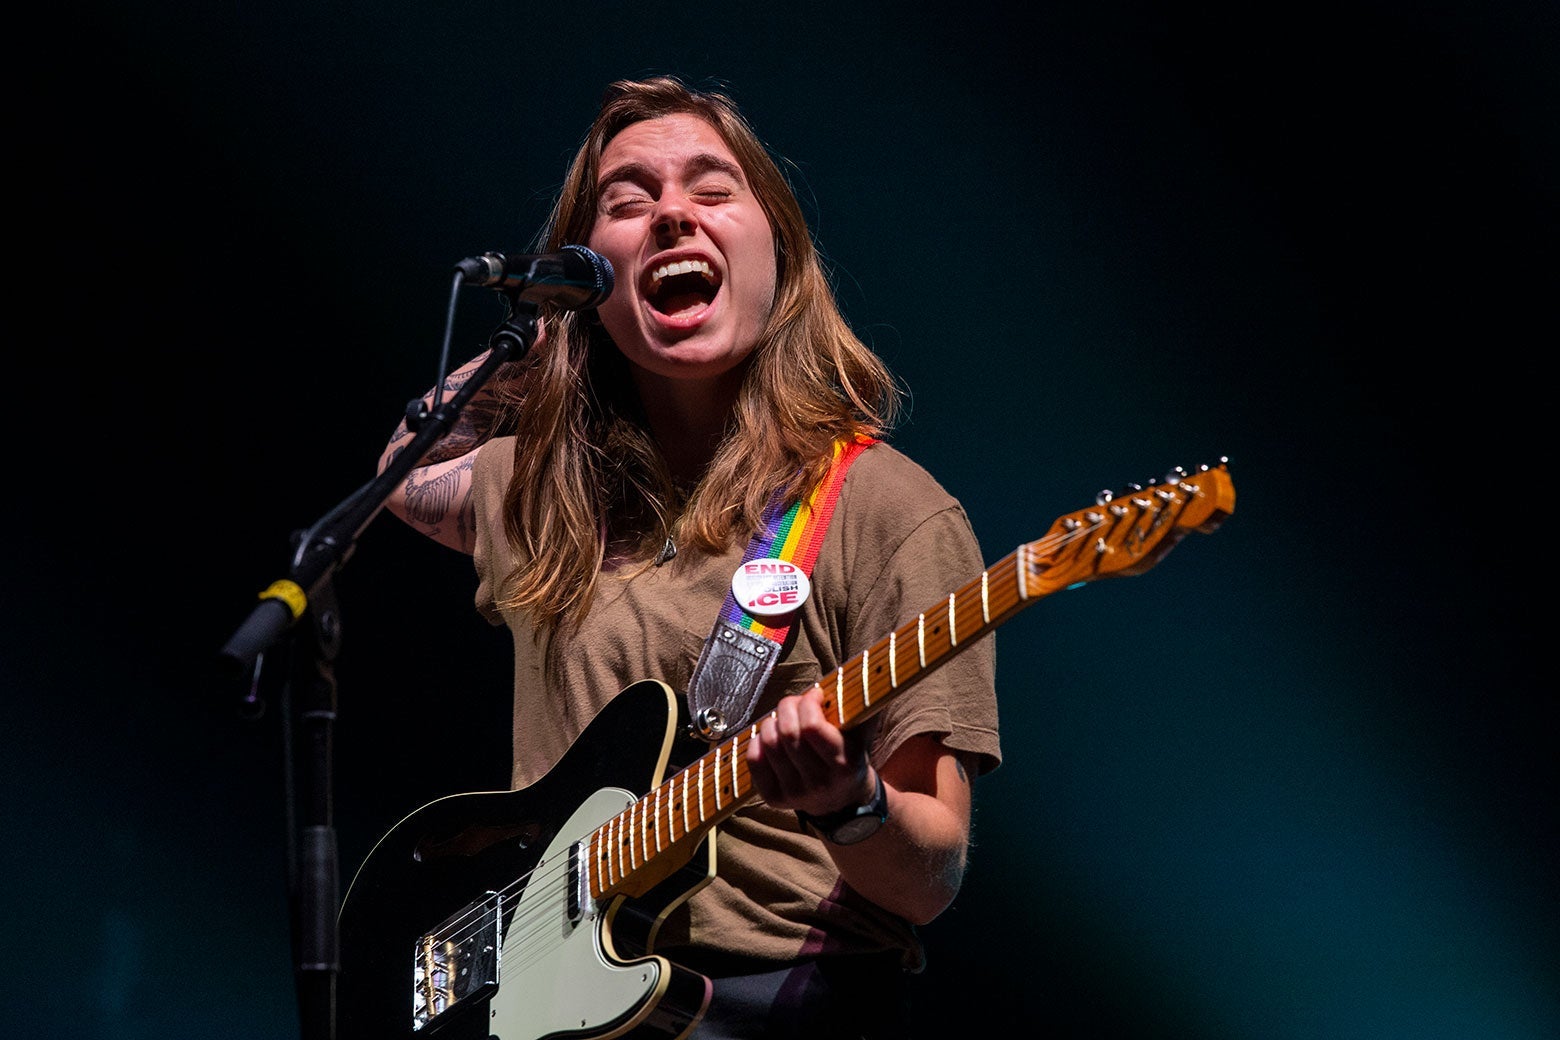 Julien Baker sings into a microphone and plays a guitar with a rainbow strap.